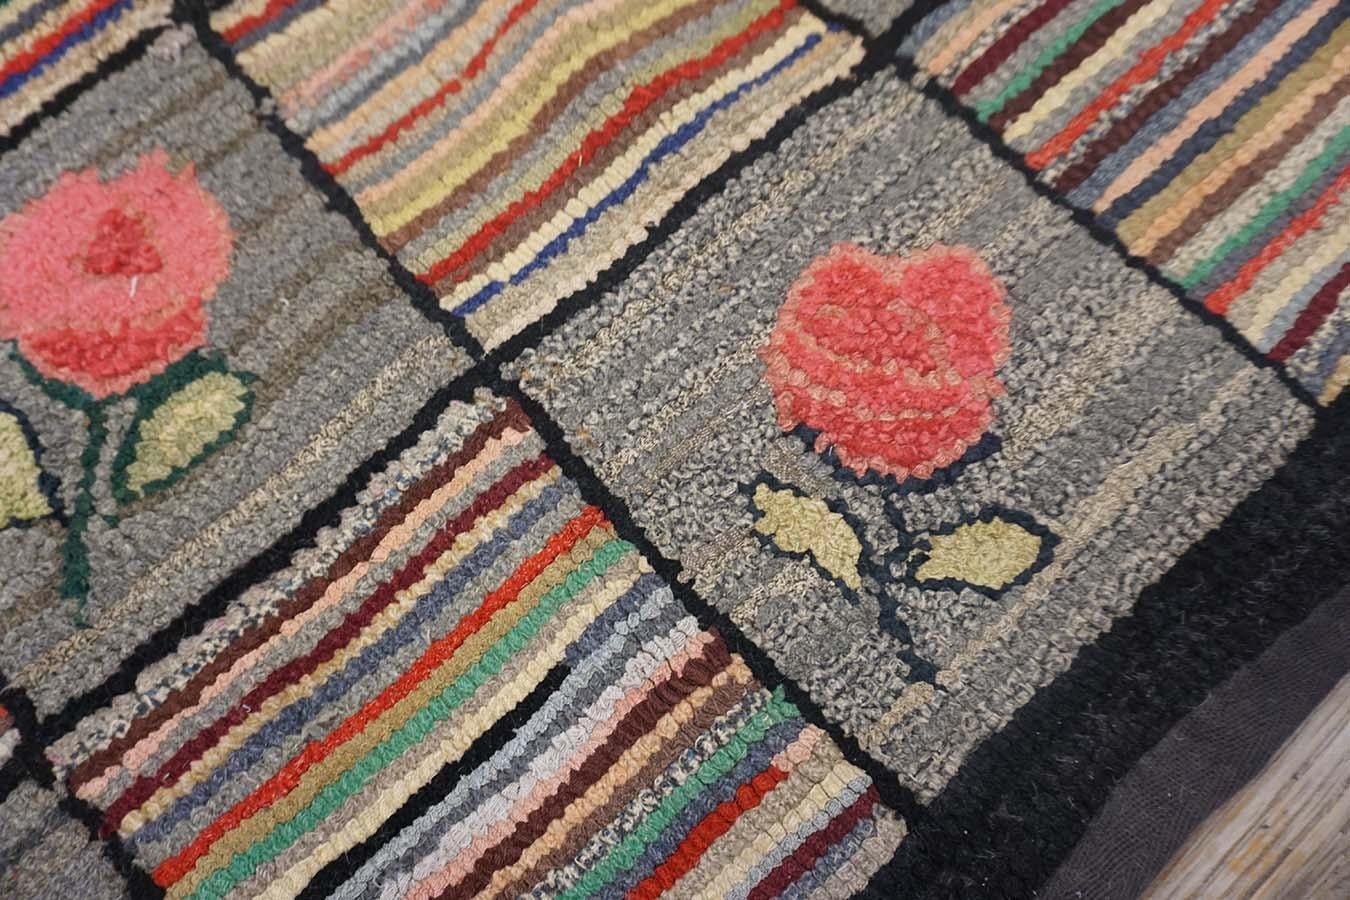 Hand-Woven 1930s American Hooked Rug ( 5'5